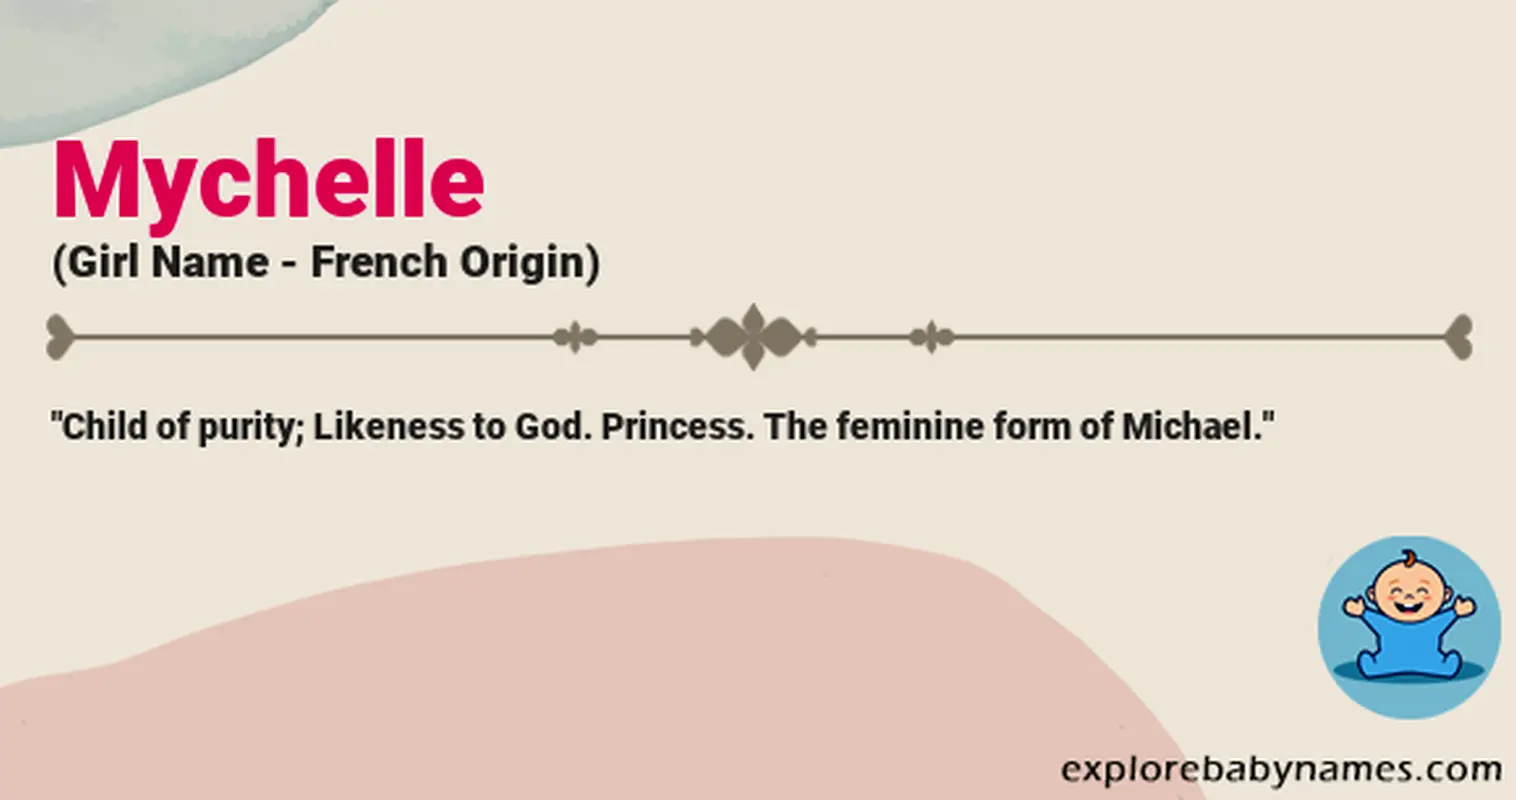 Meaning of Mychelle